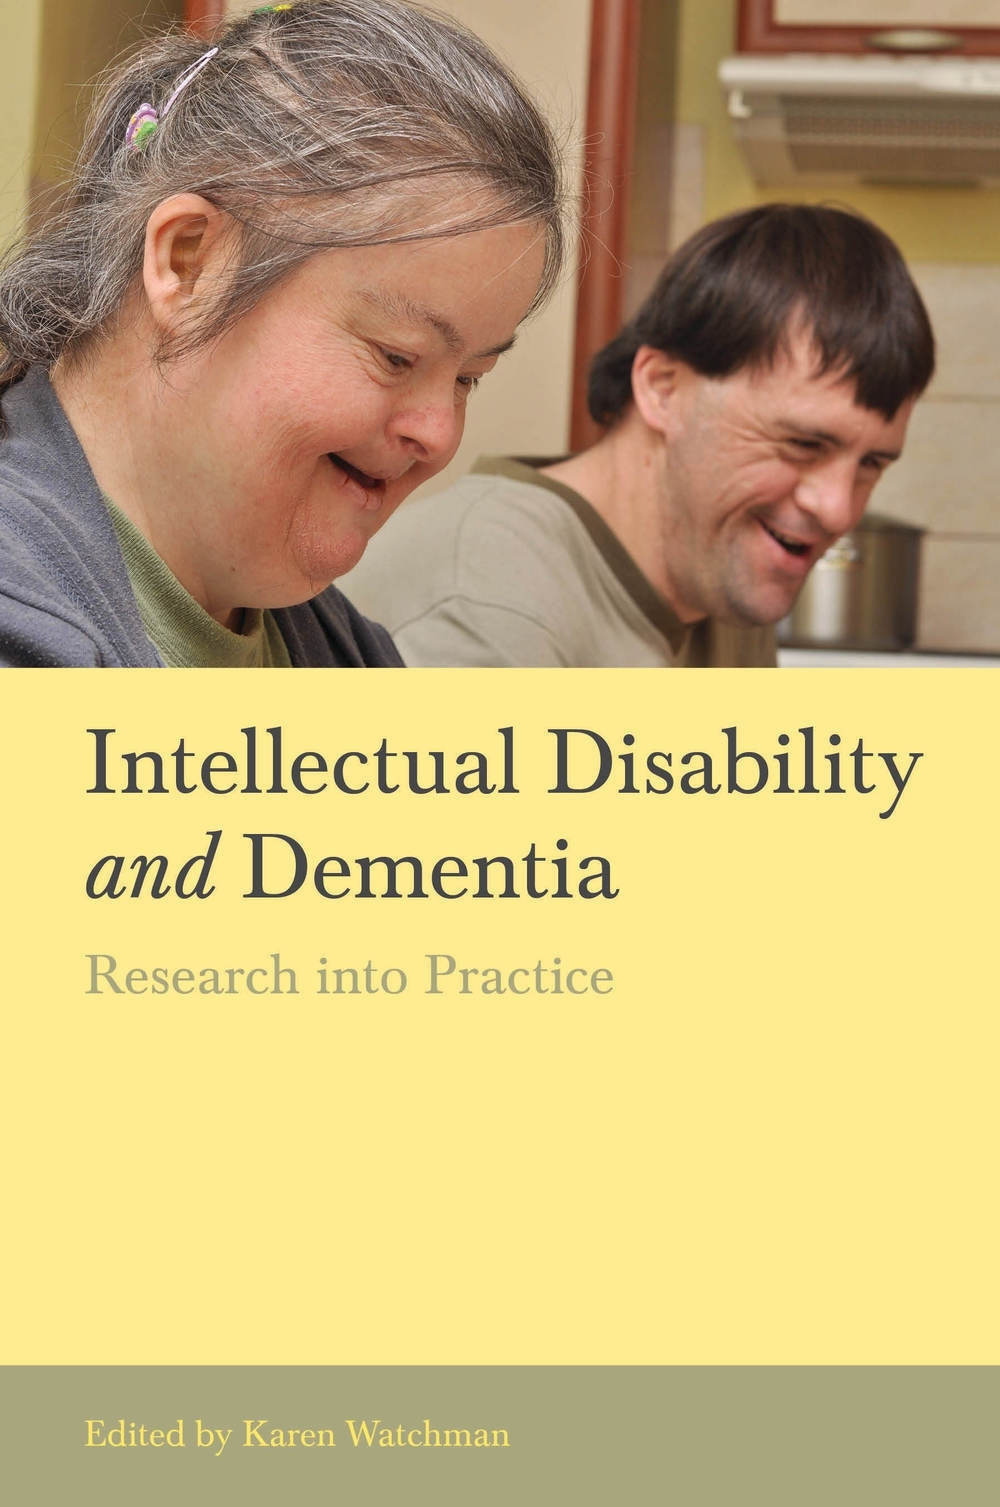 Intellectual Disability and Dementia by Karen Watchman, No Author Listed